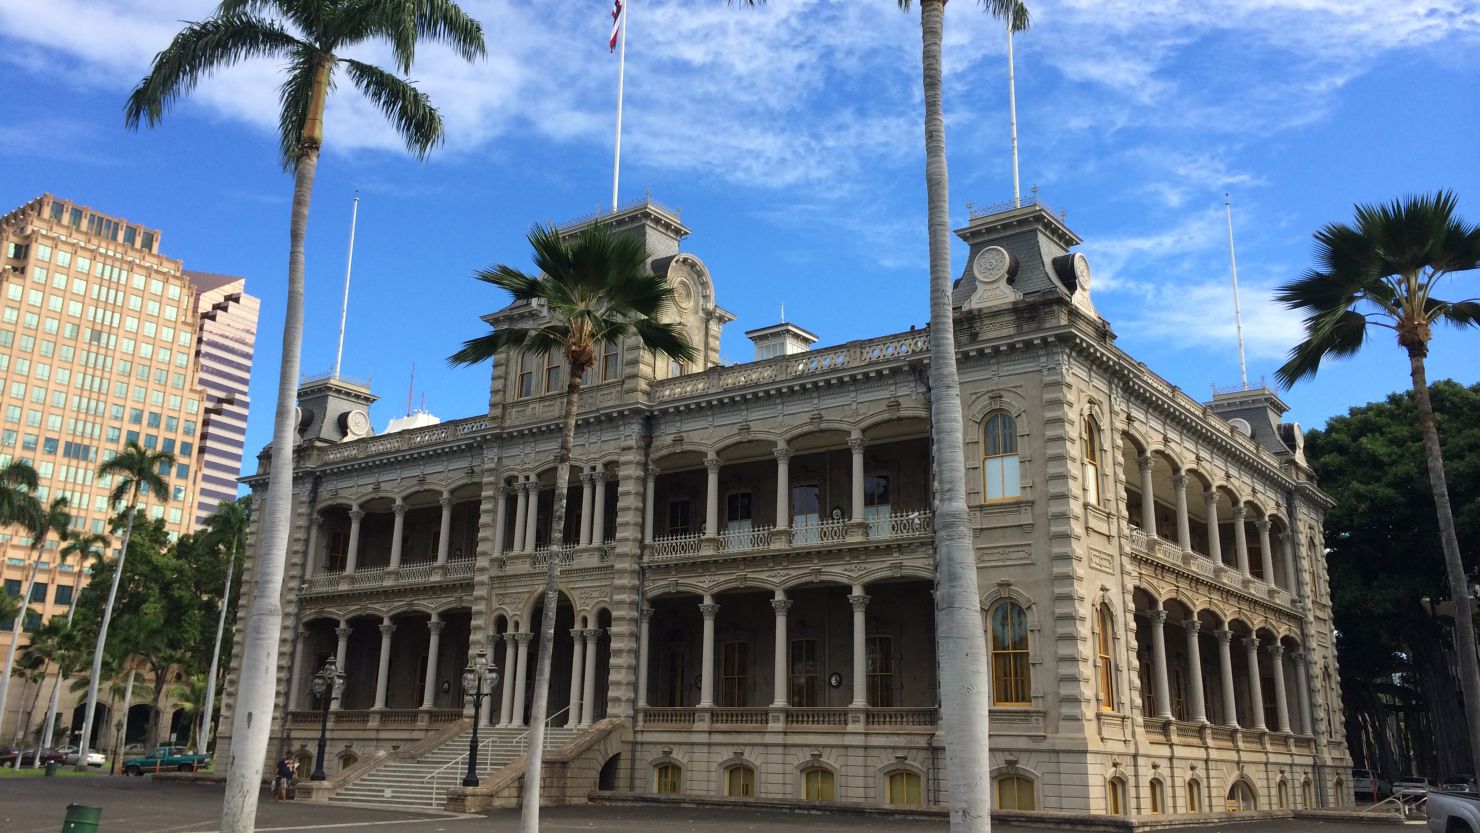 Iolani Palace, in Honolulu, Hawaii, is the only official residence of royalty in the United States.